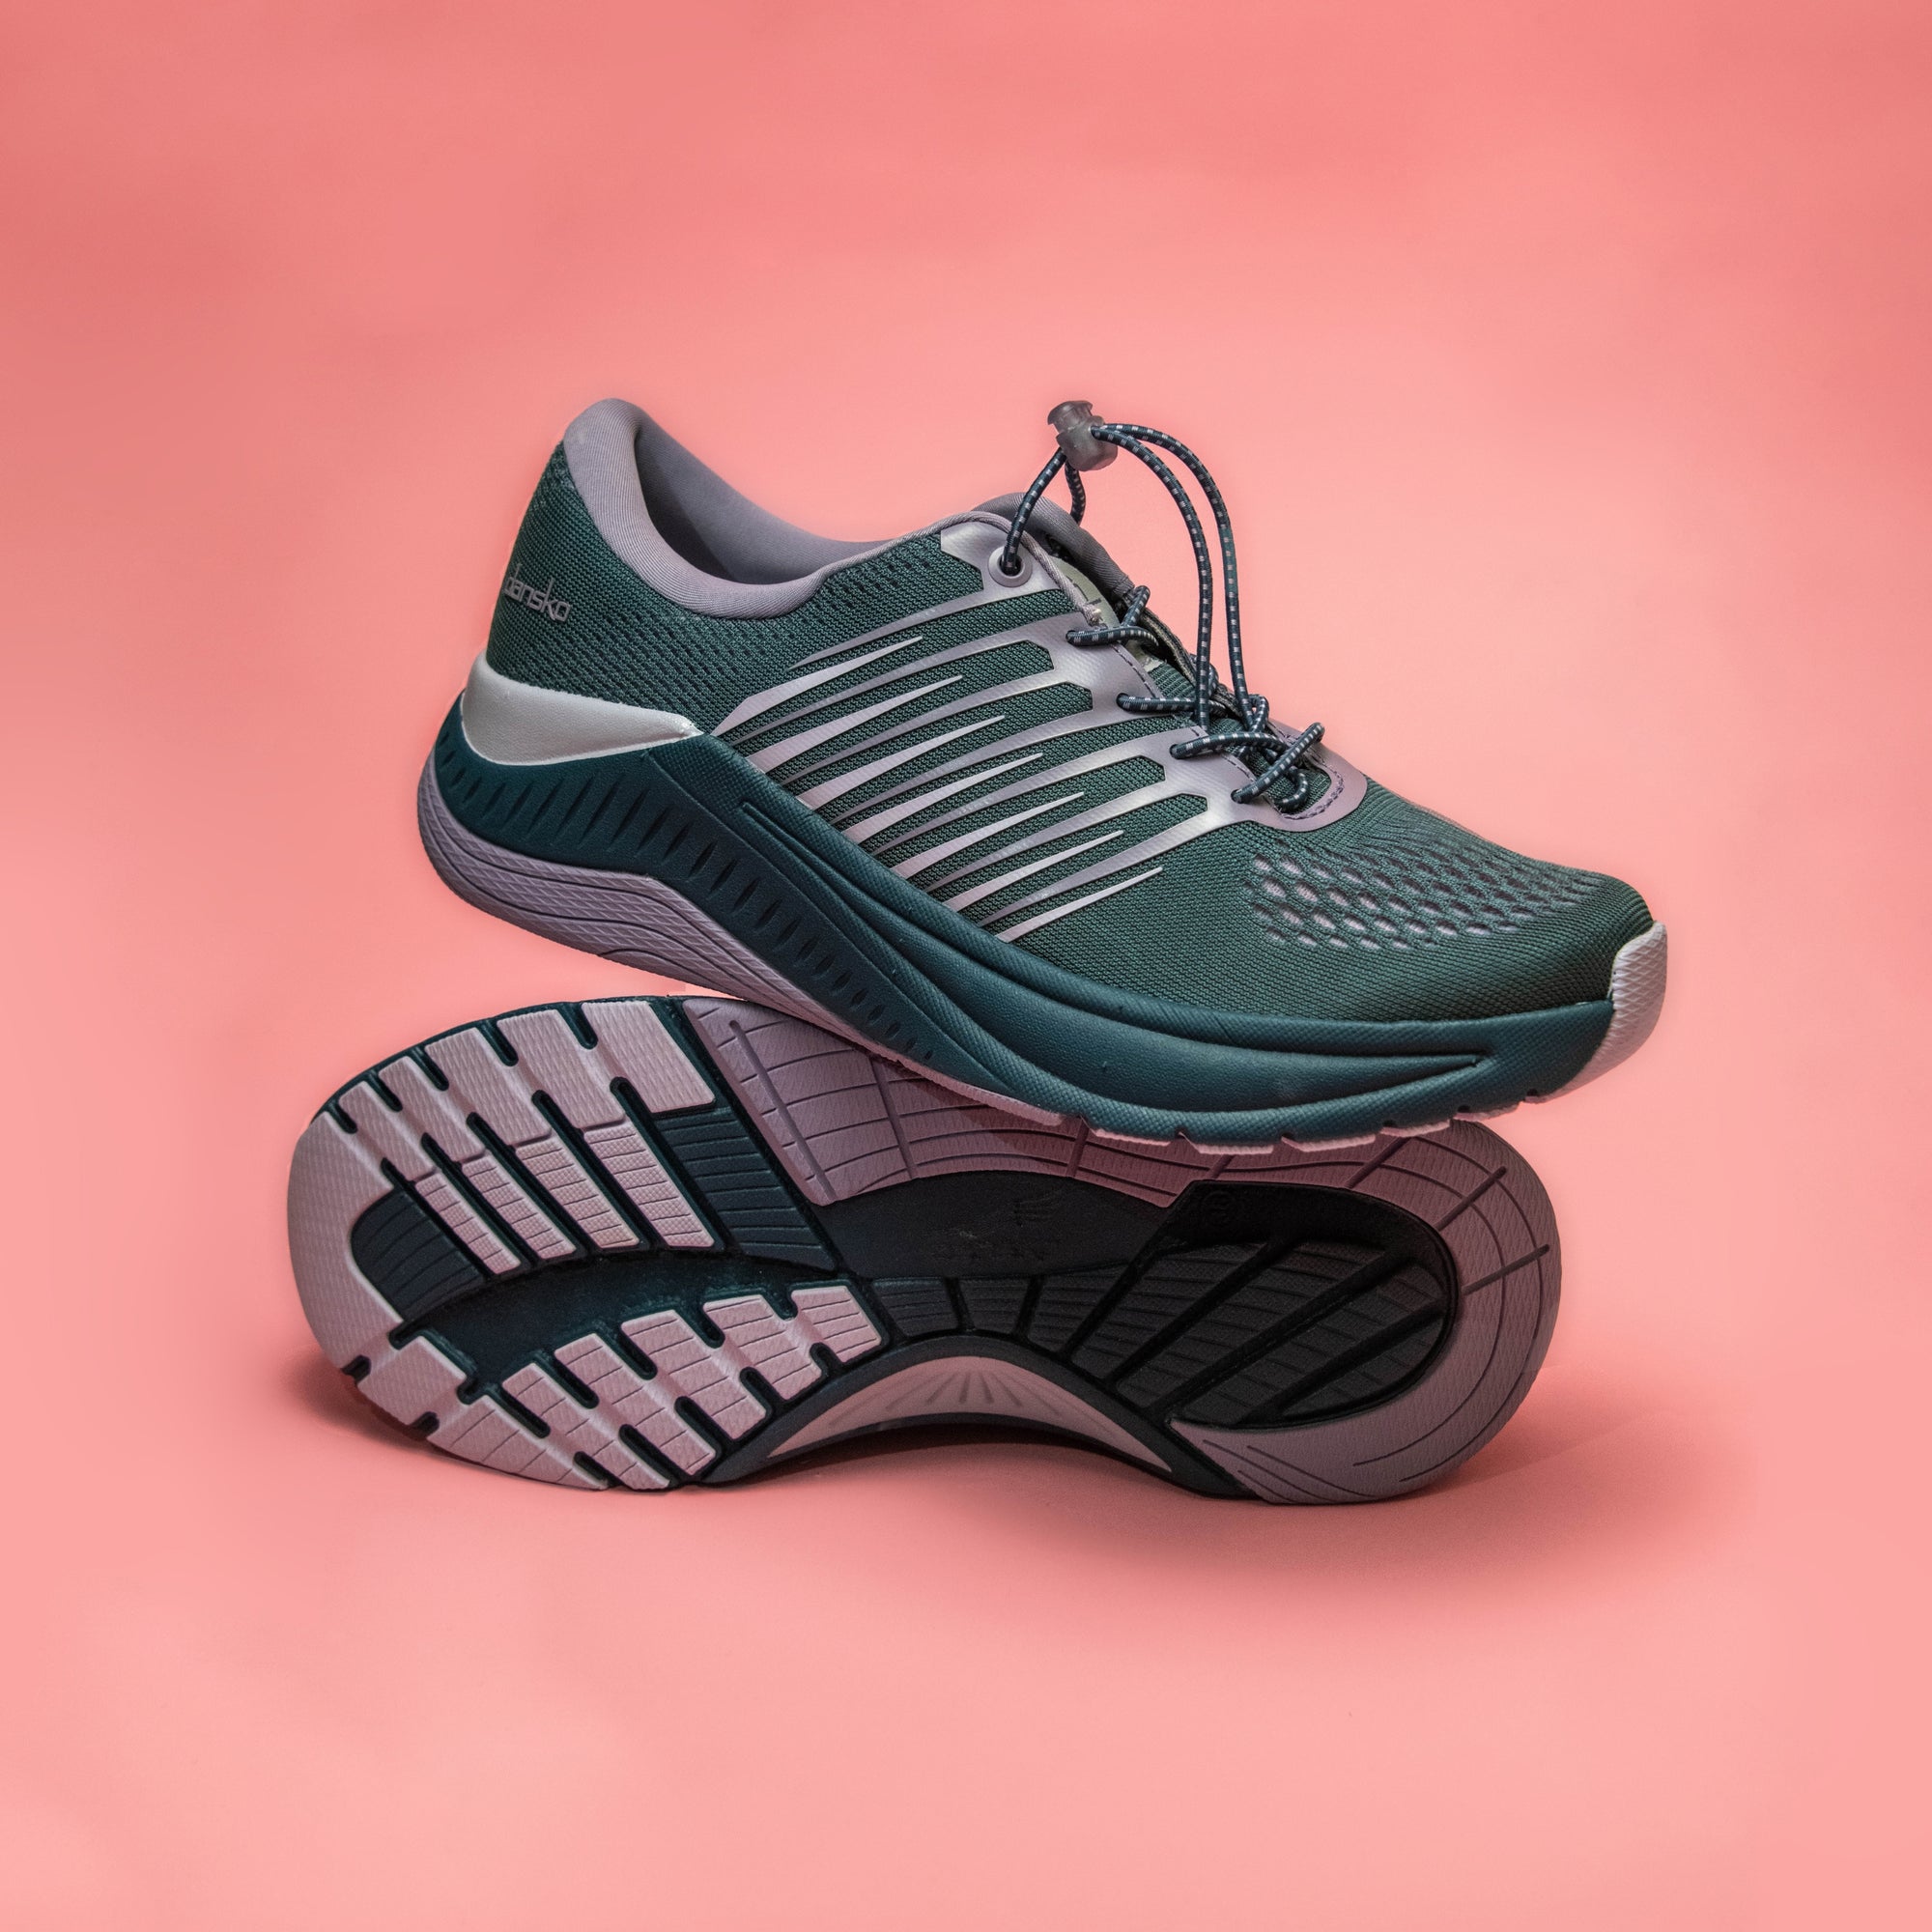 Penni in a premium walking shoe with easy toggle adjustability and grippy tread for easy wear and all-day support.